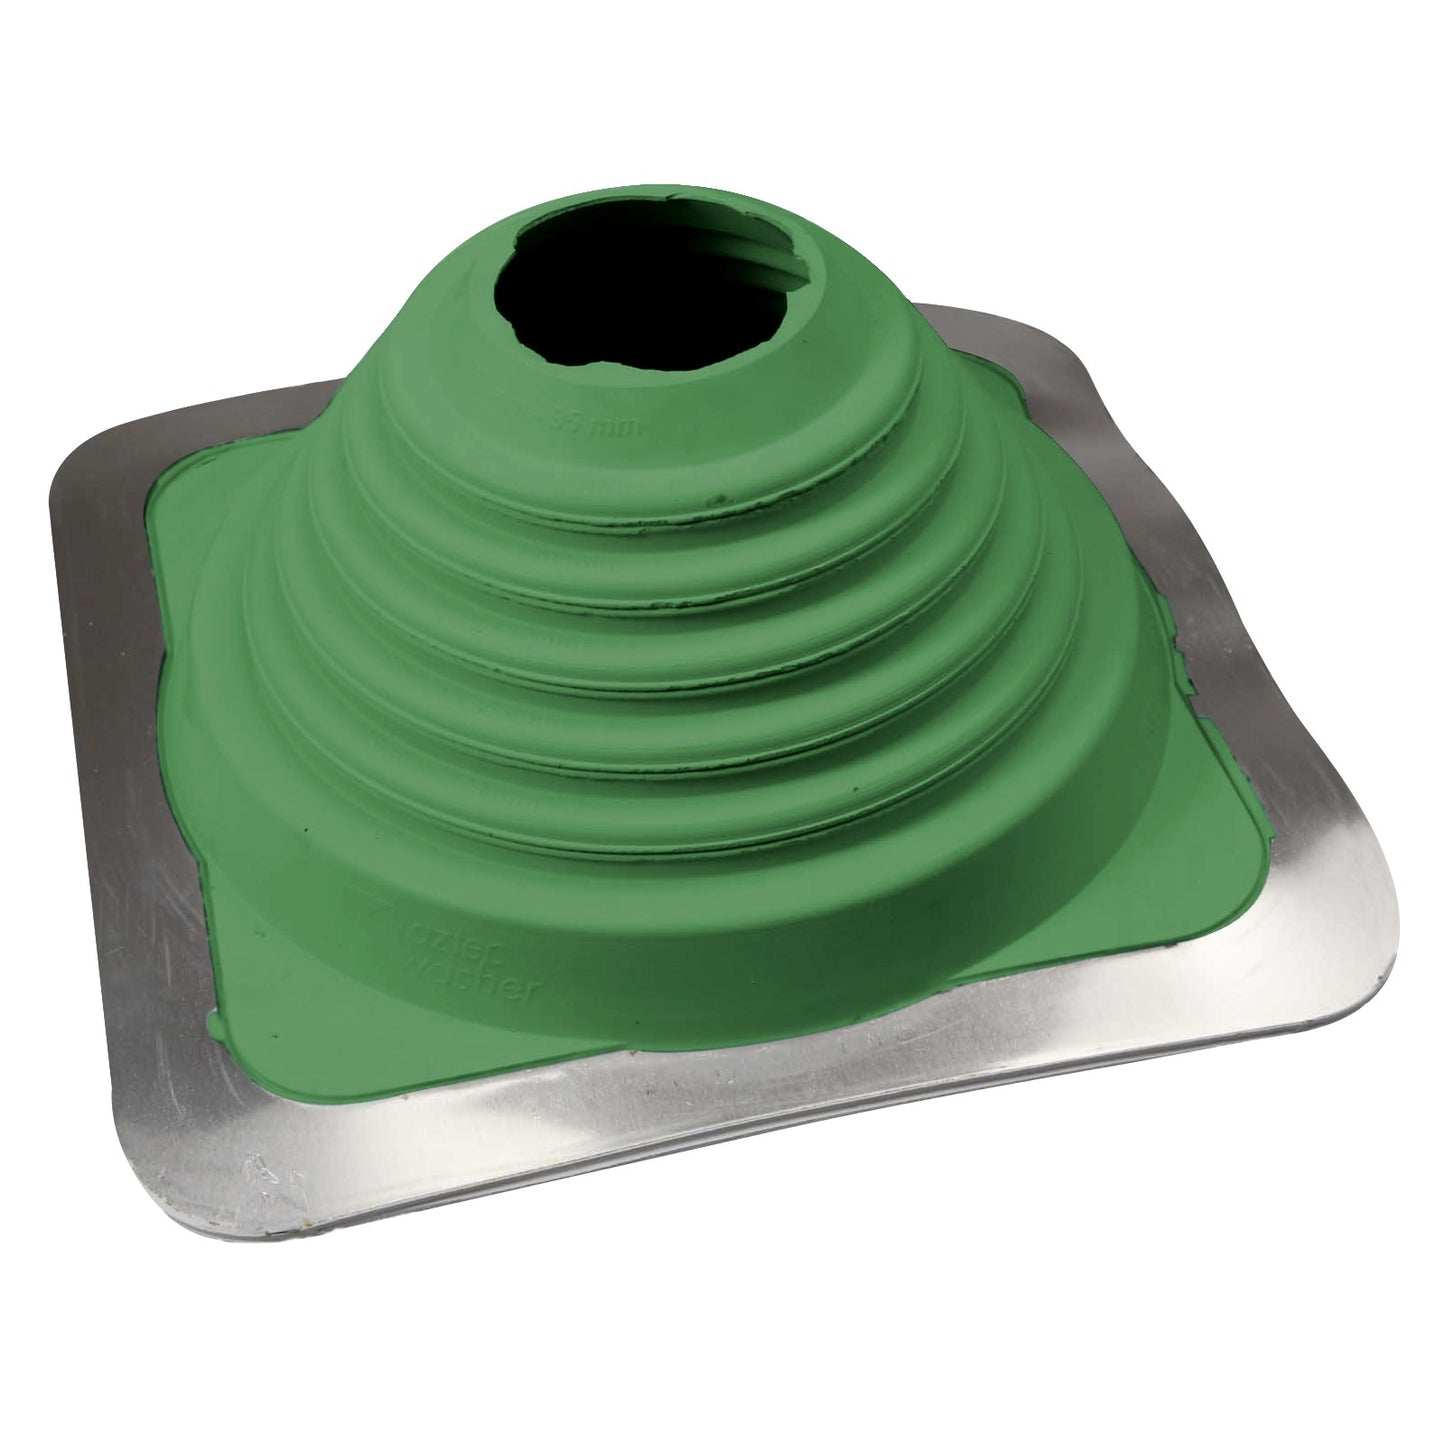 #4 Roofjack Square EPDM Pipe Flashing Boot Light Green